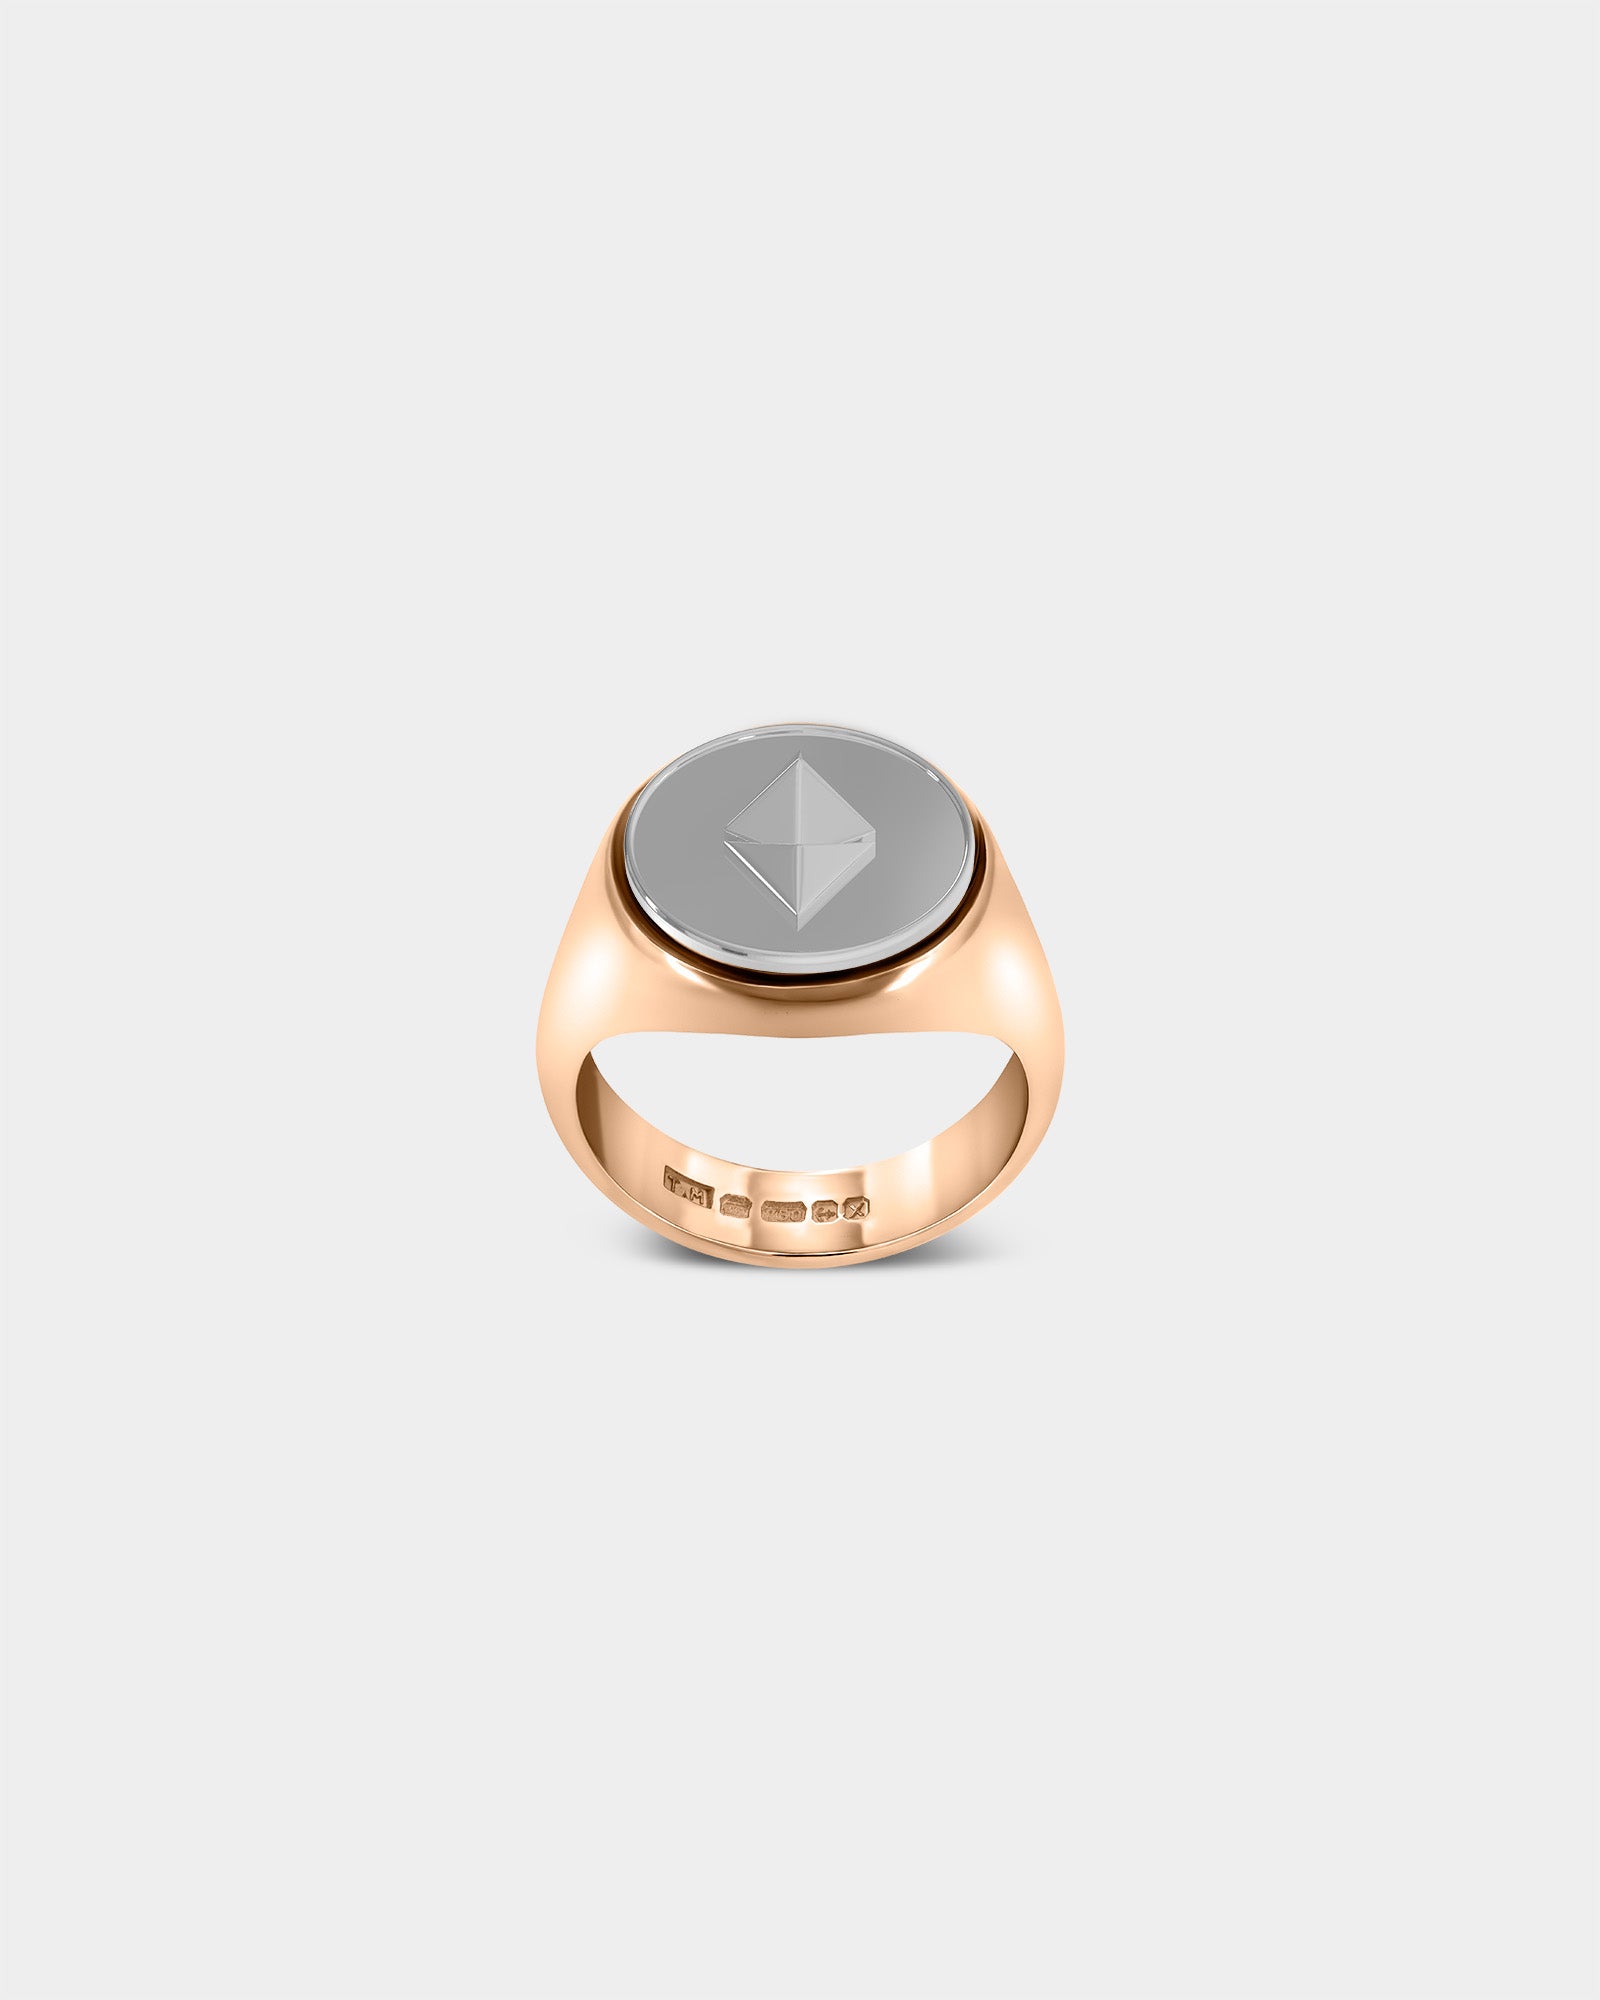 Large Ethereum Crypto Ring in 9k Rose Gold / Sterling Silver by Wilson Grant